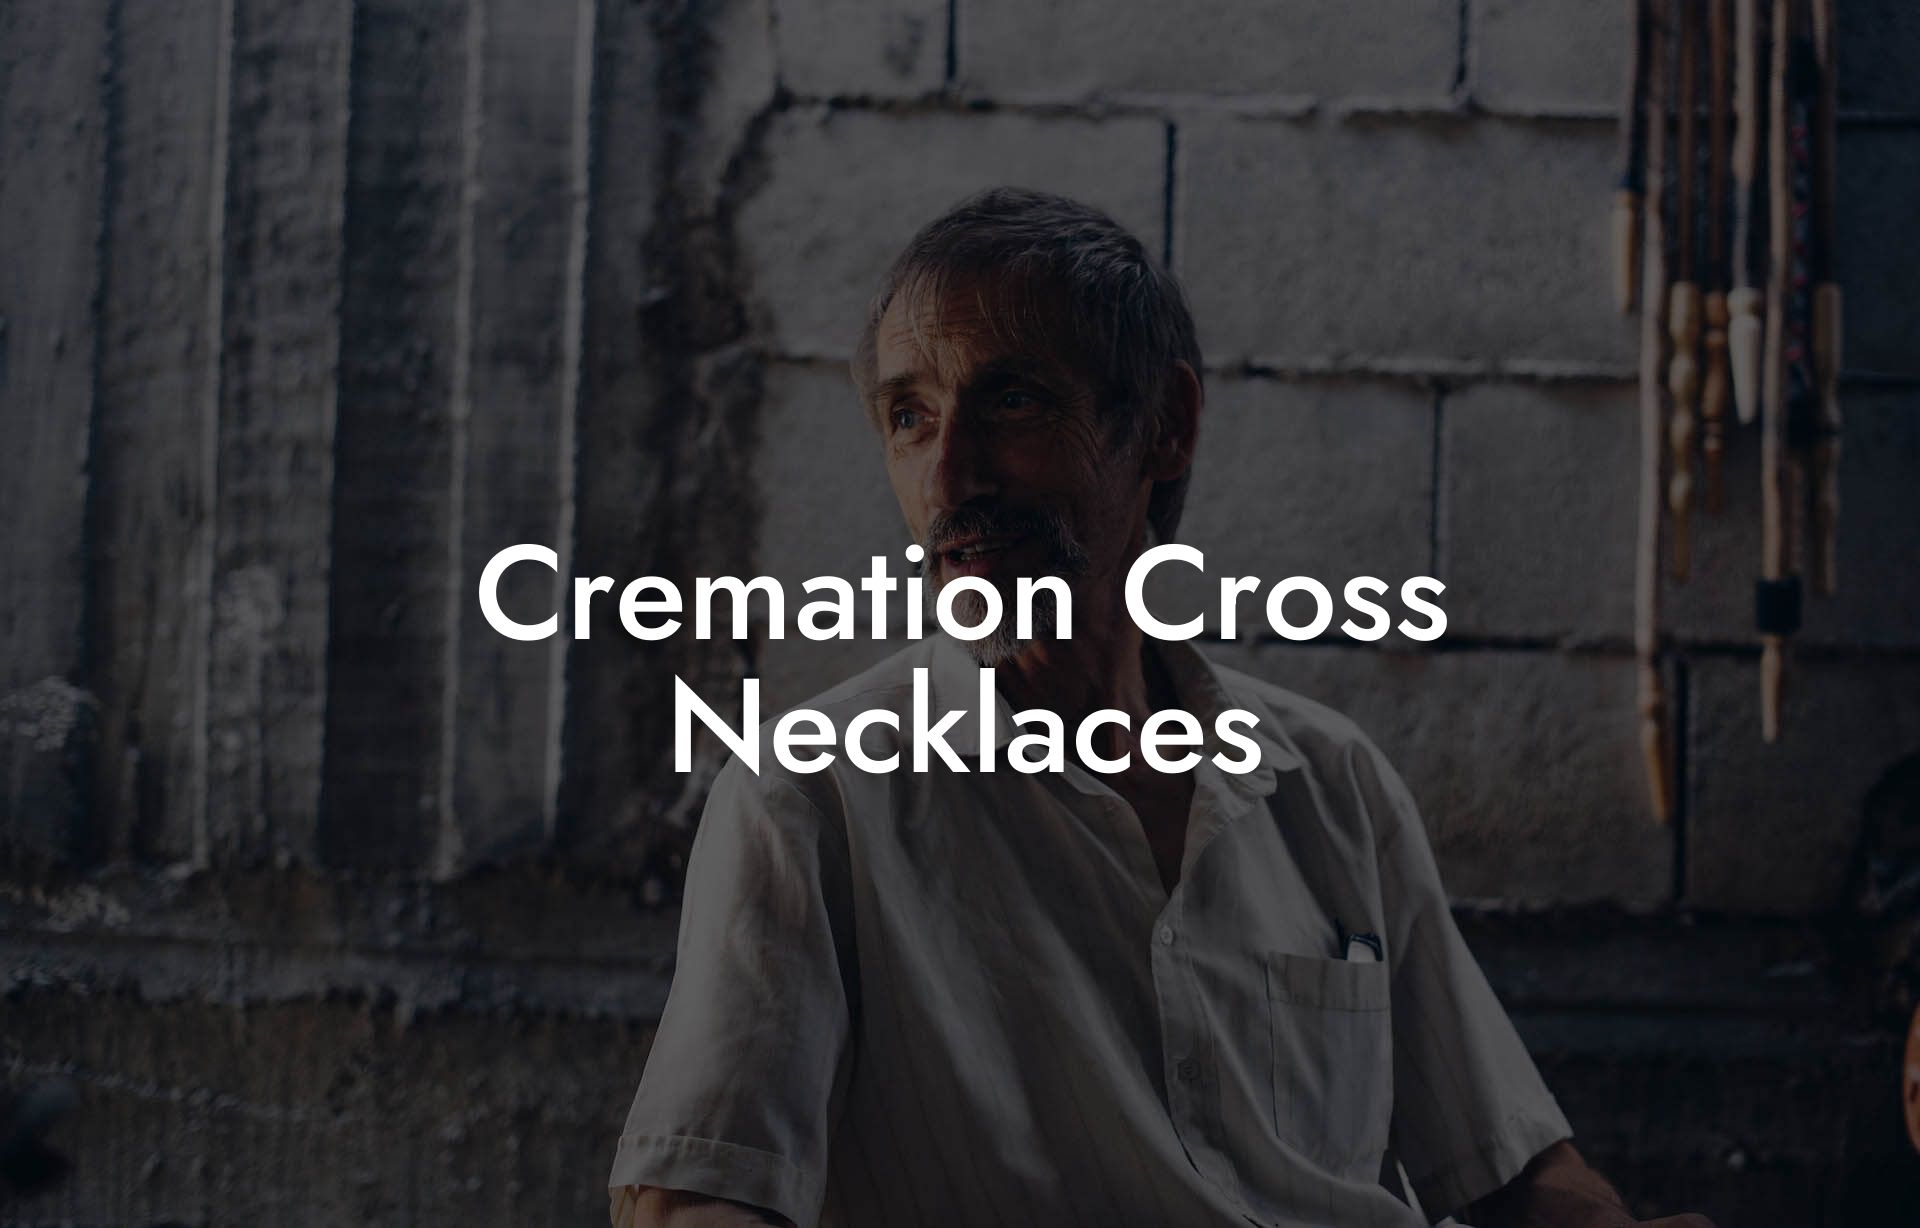 Cremation Cross Necklaces